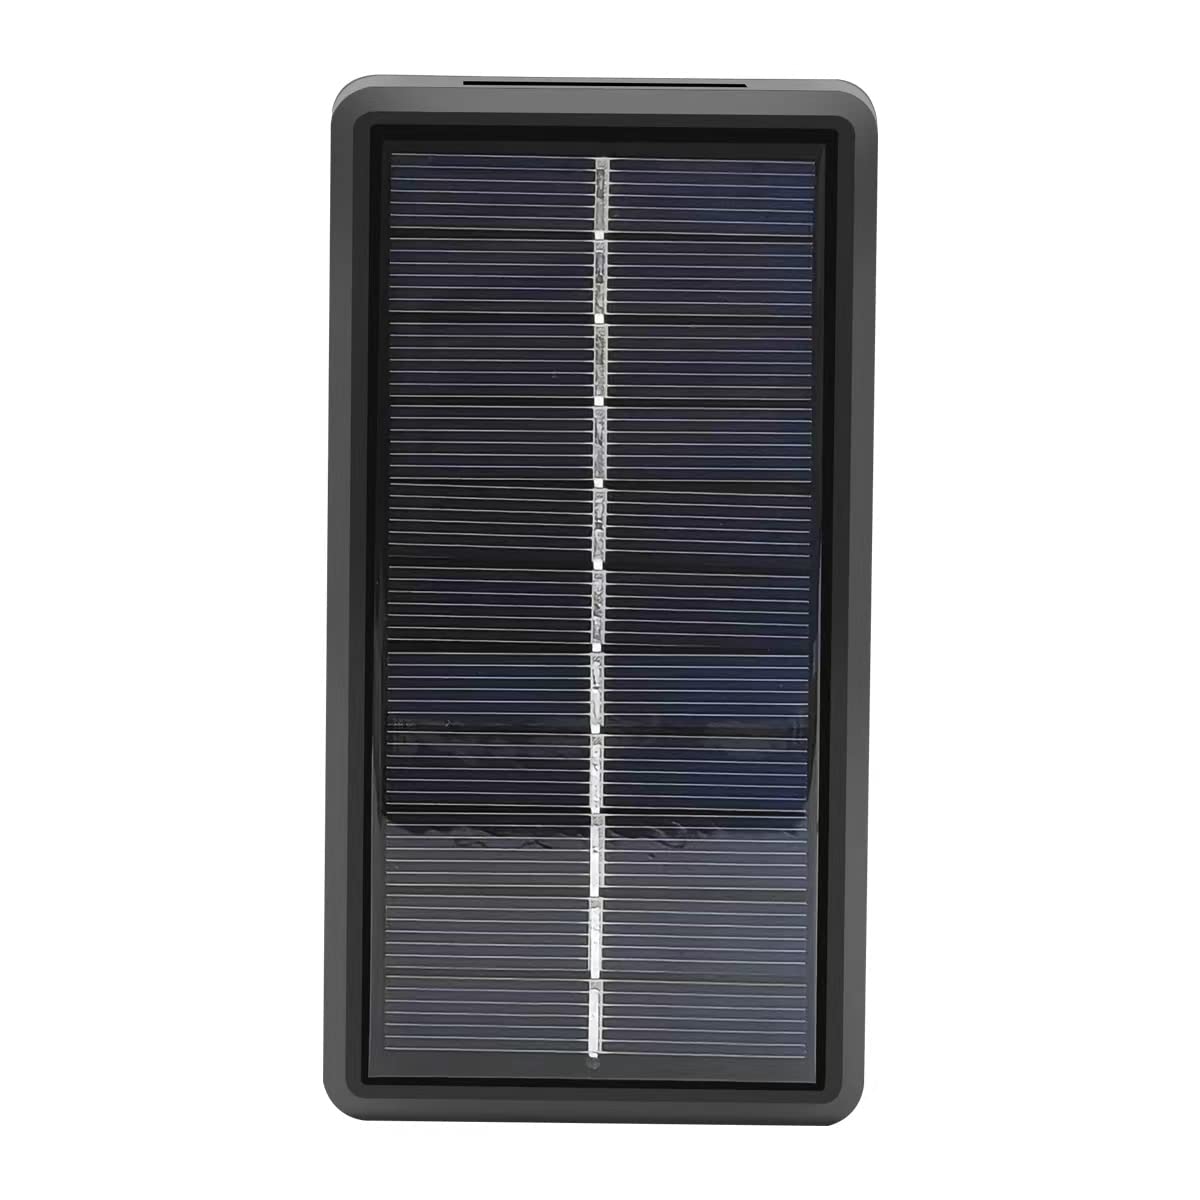 USB Battery Charger Multifunctional Solar Lithium Battery Charger 18650 Rechargeable Battery